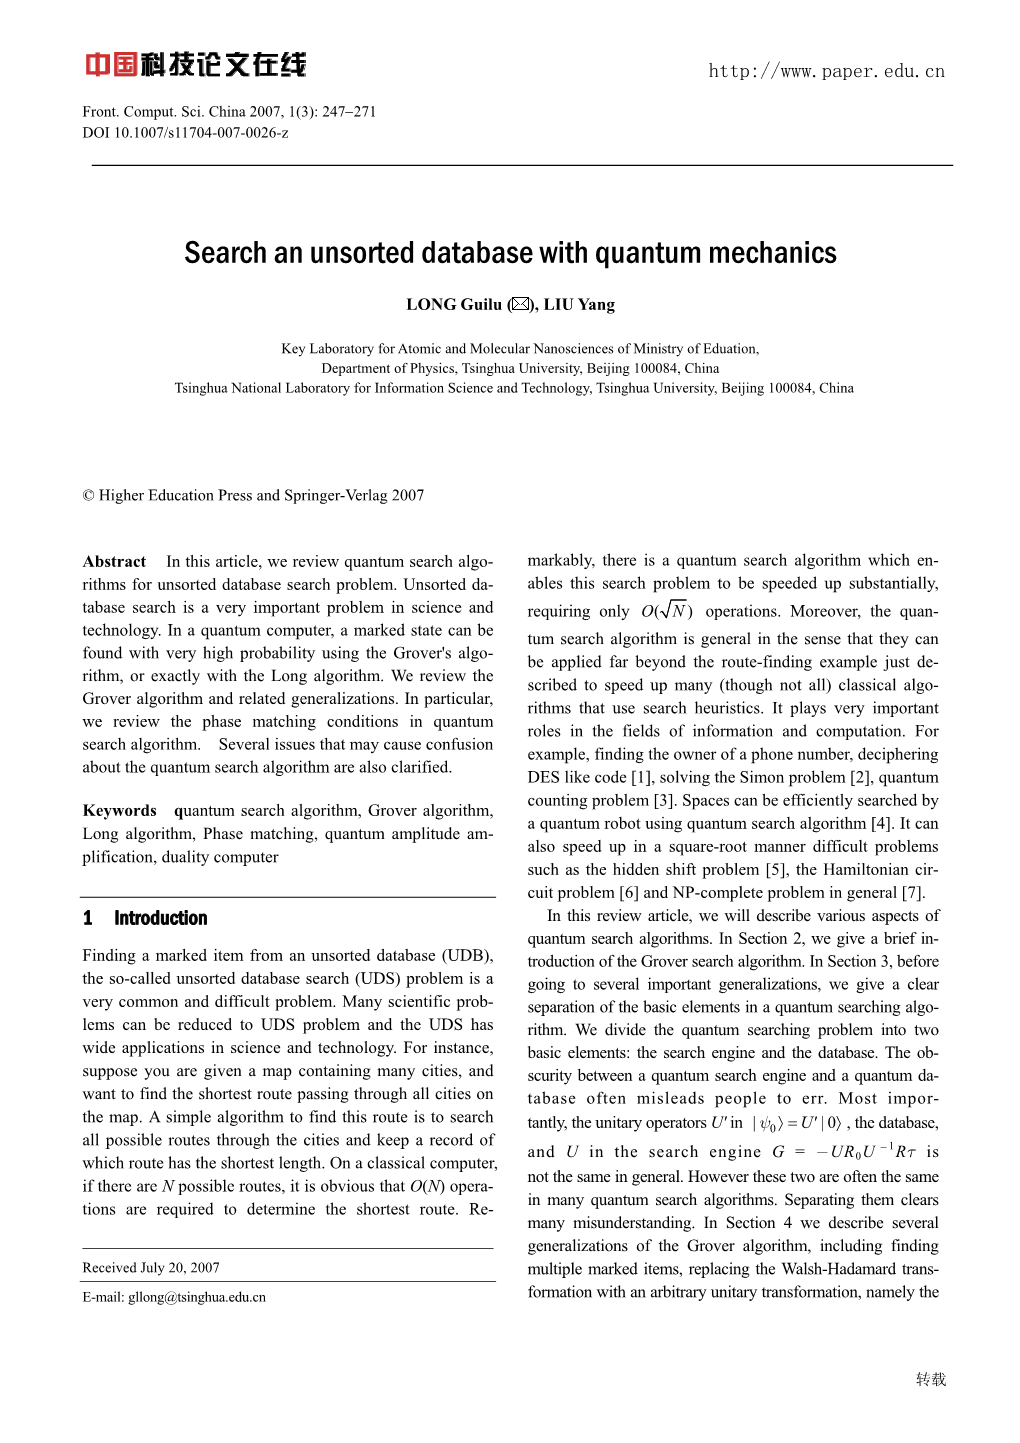 Search an Unsorted Database with Quantum Mechanics